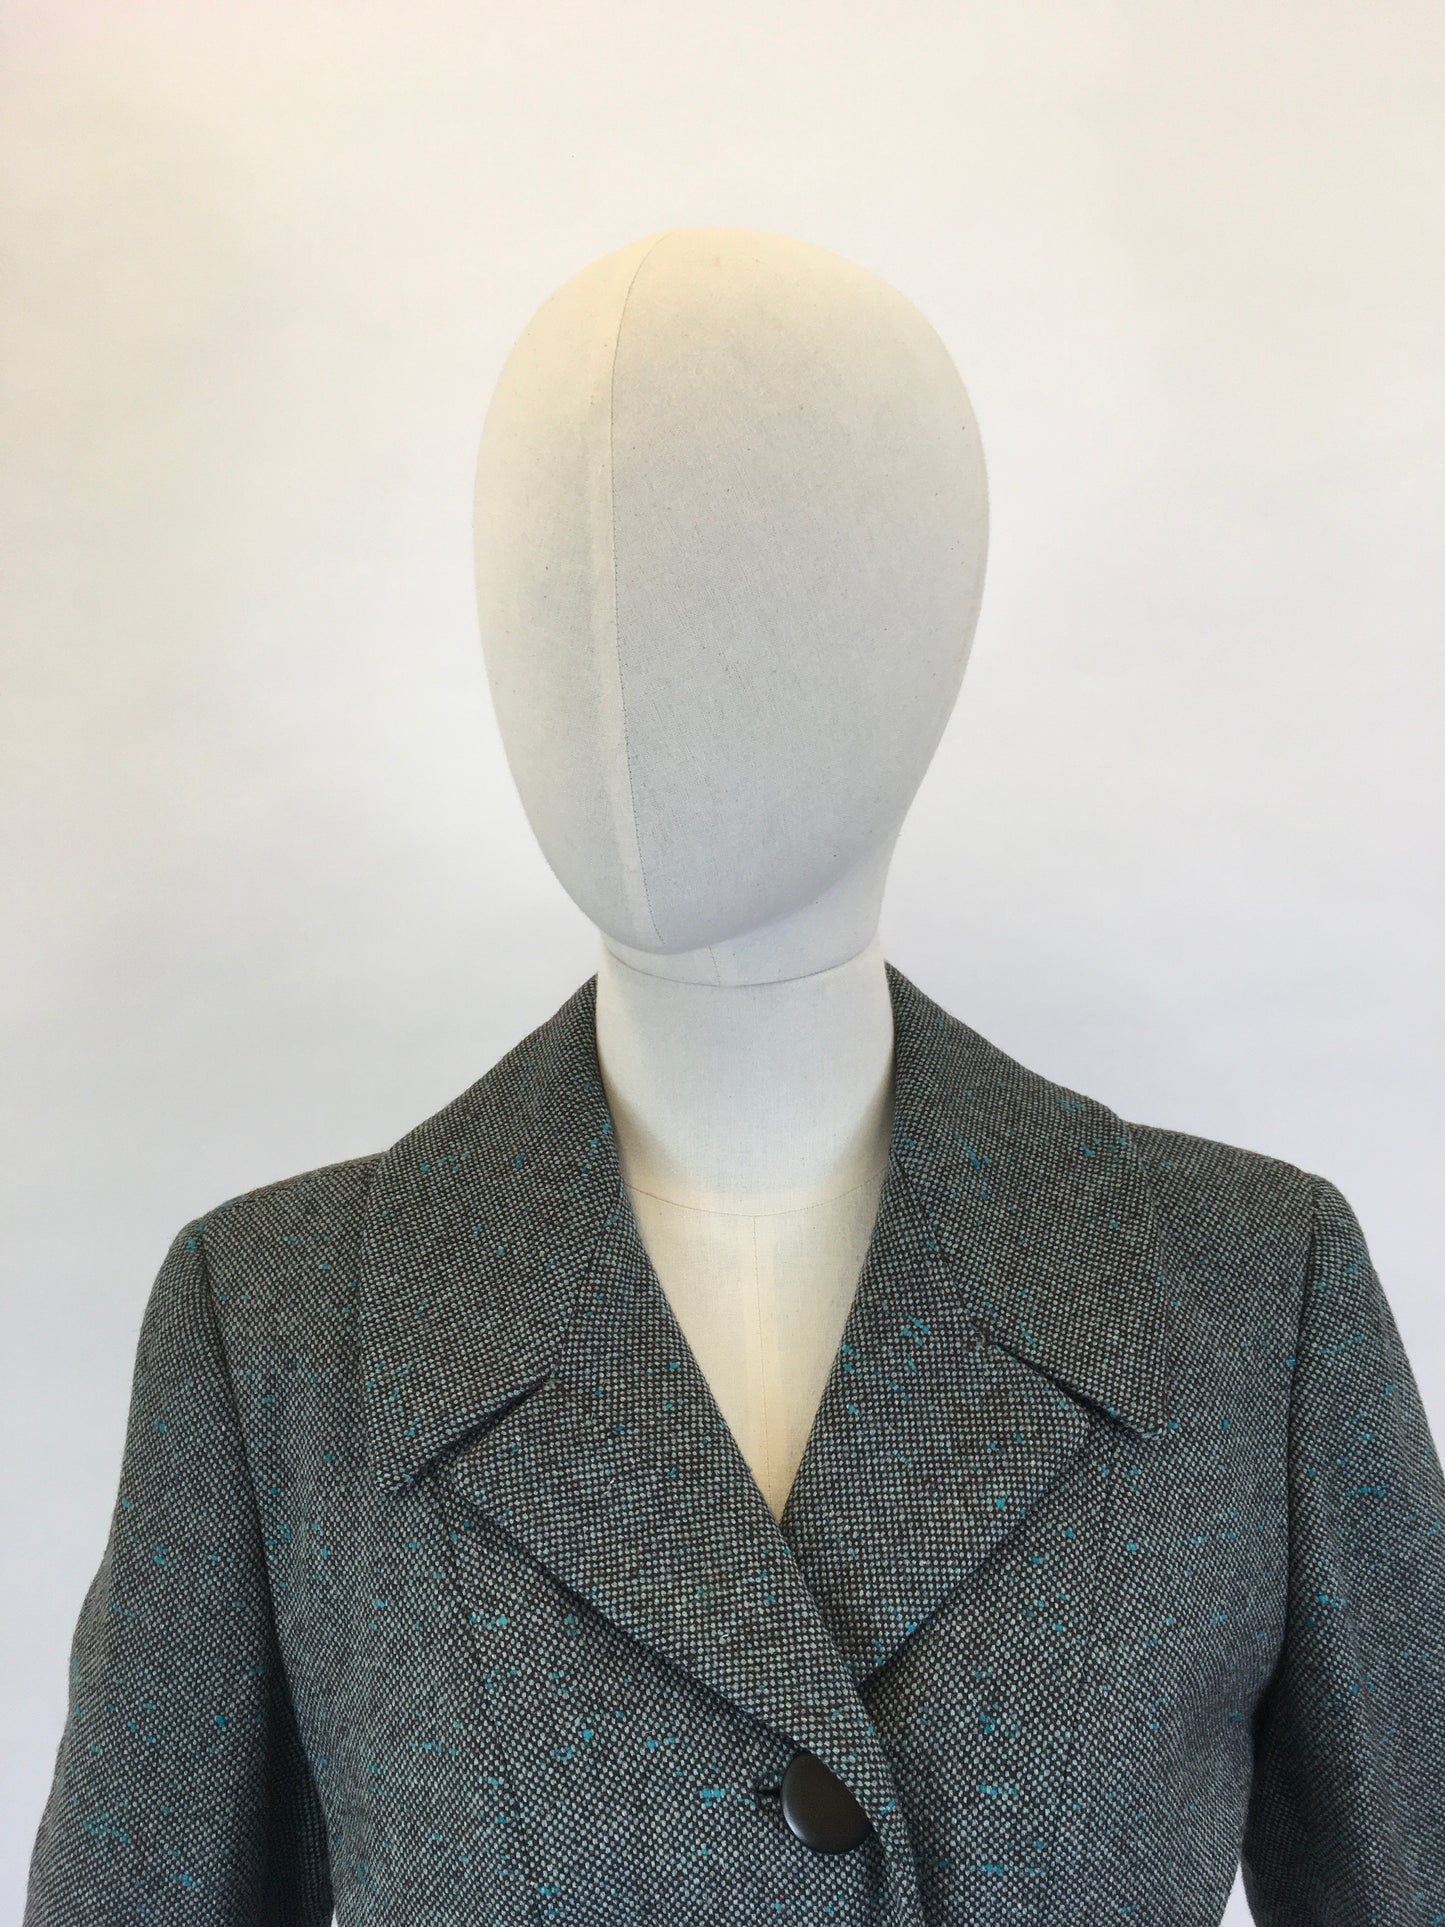 Original late 1940’s 2pc Woollen Suit by ‘ Harella’ - Grey Toned with a Bright Teal Fleck